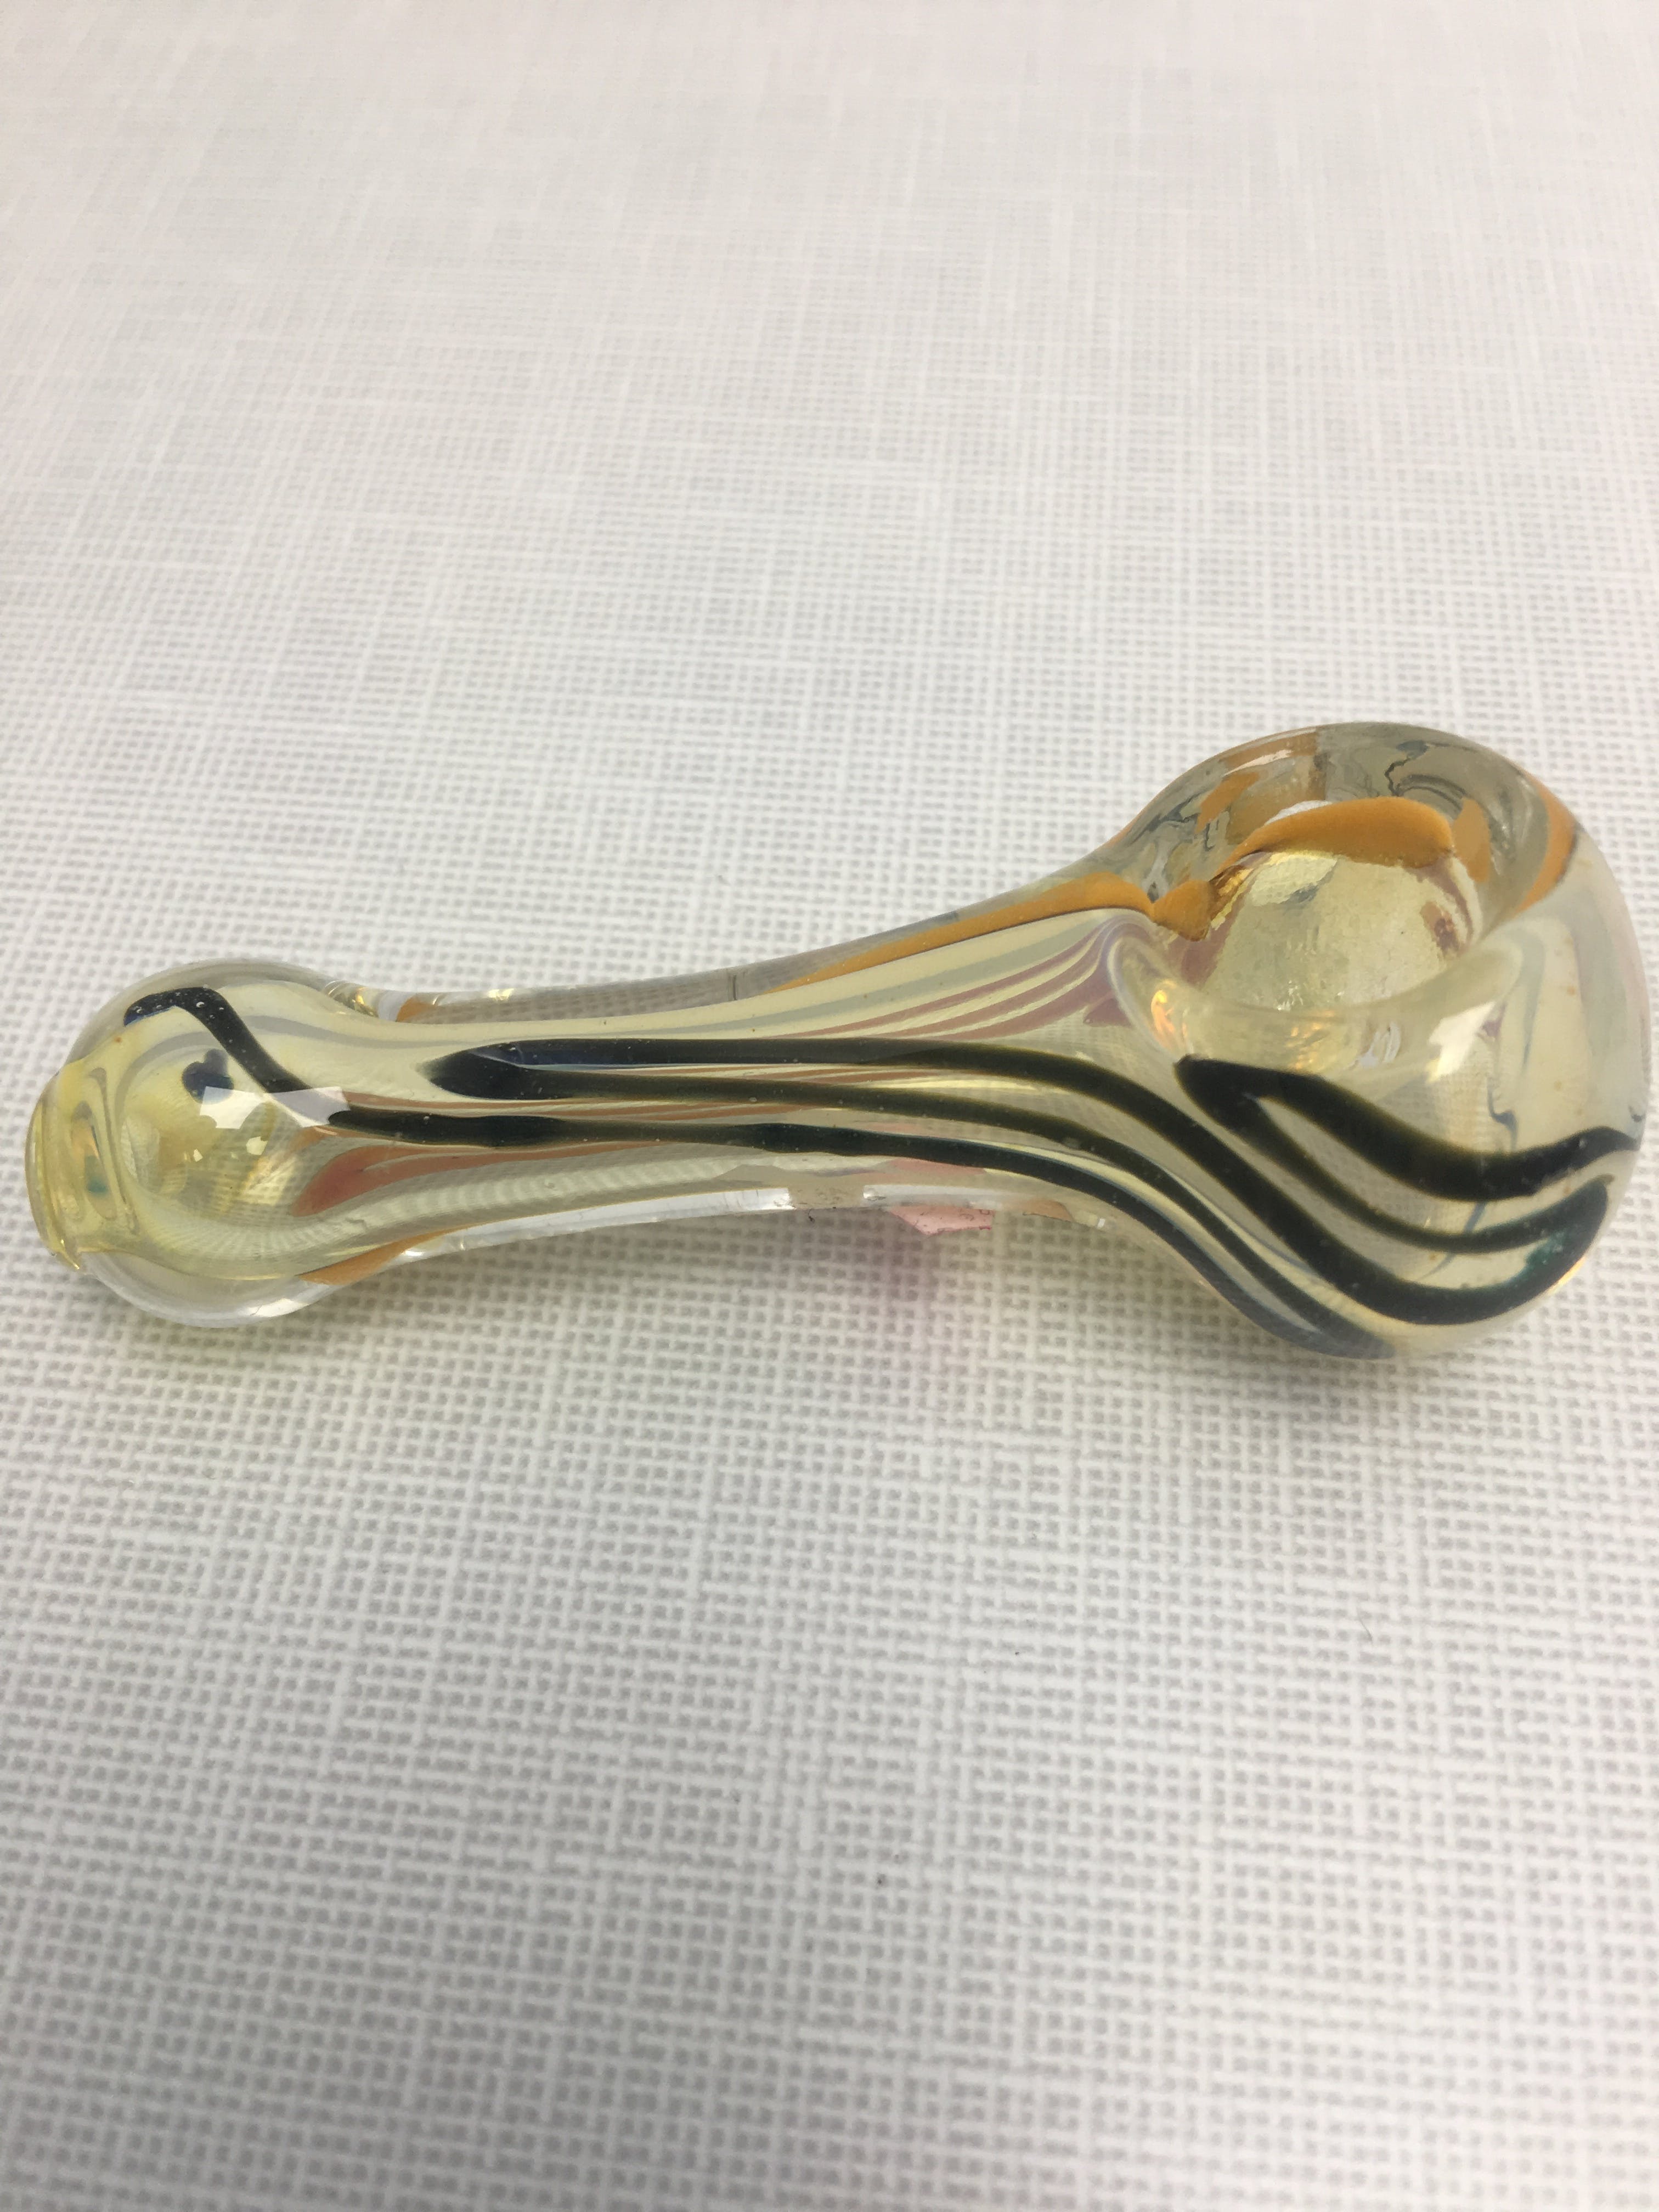 $5 Glass Pipe